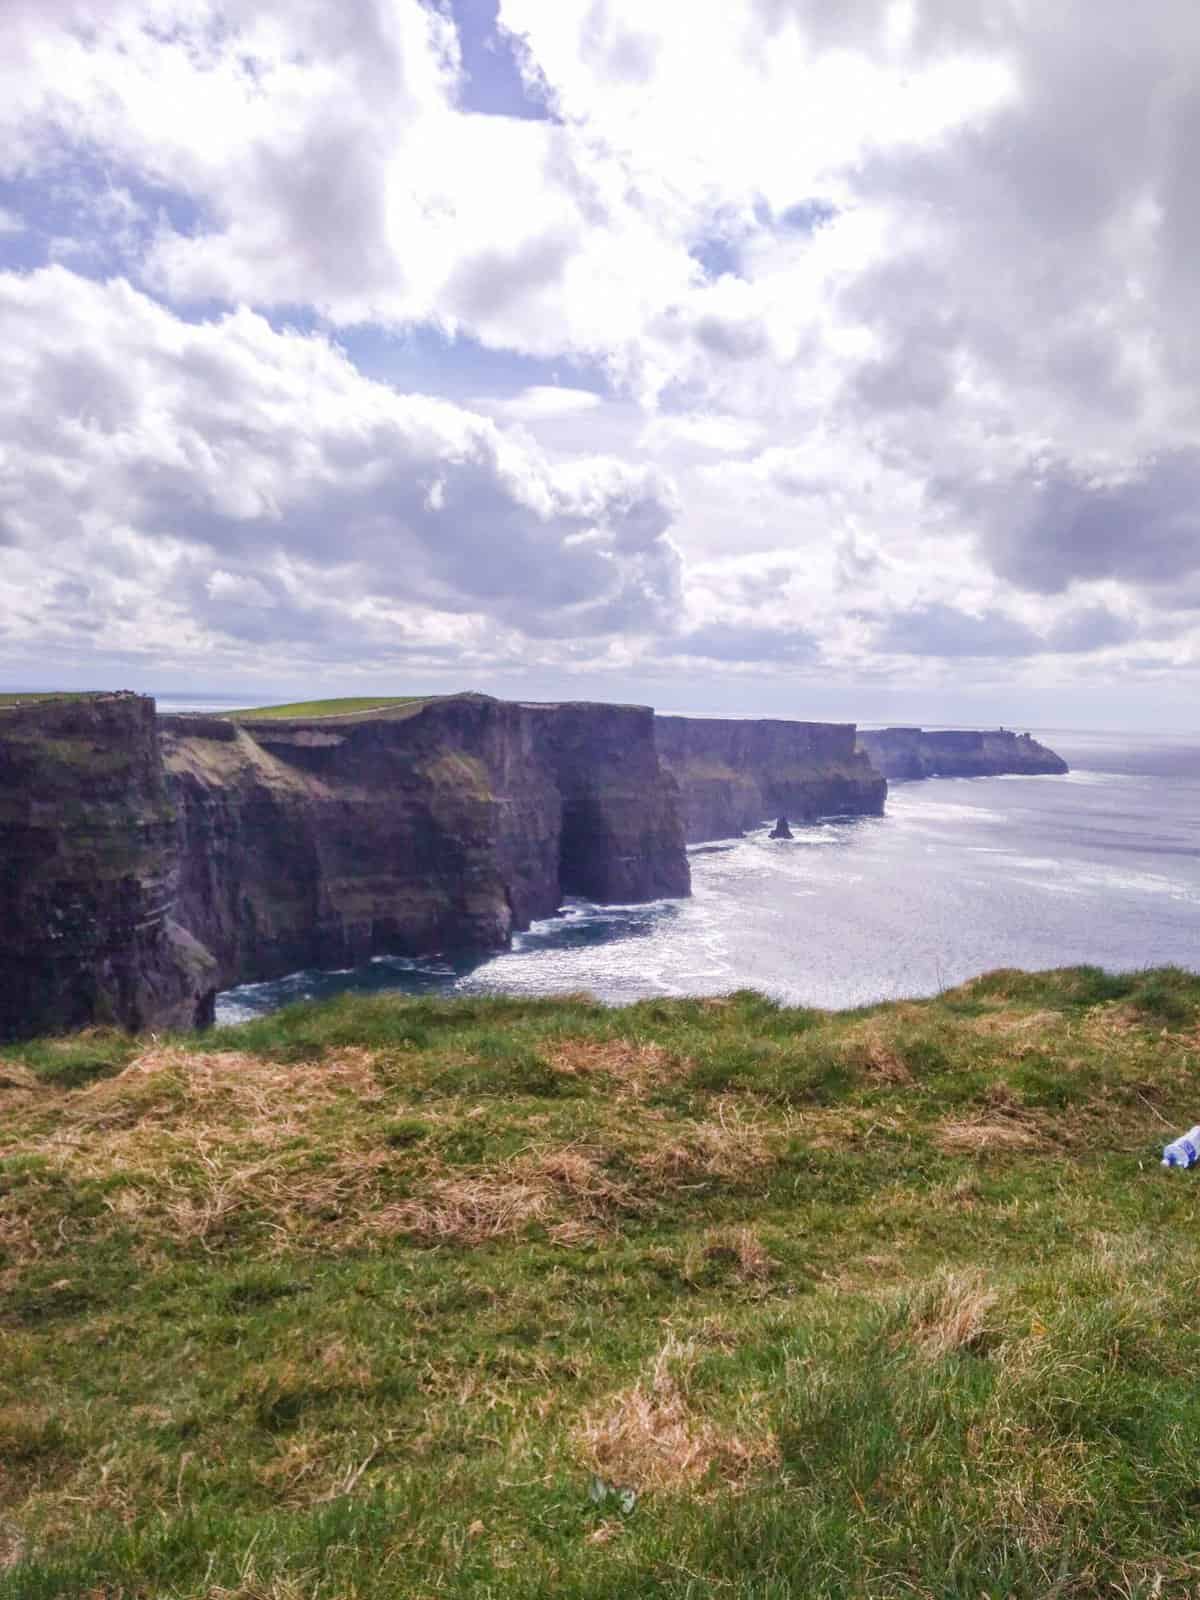 Cliffs of Moher, Ireland in April 2018